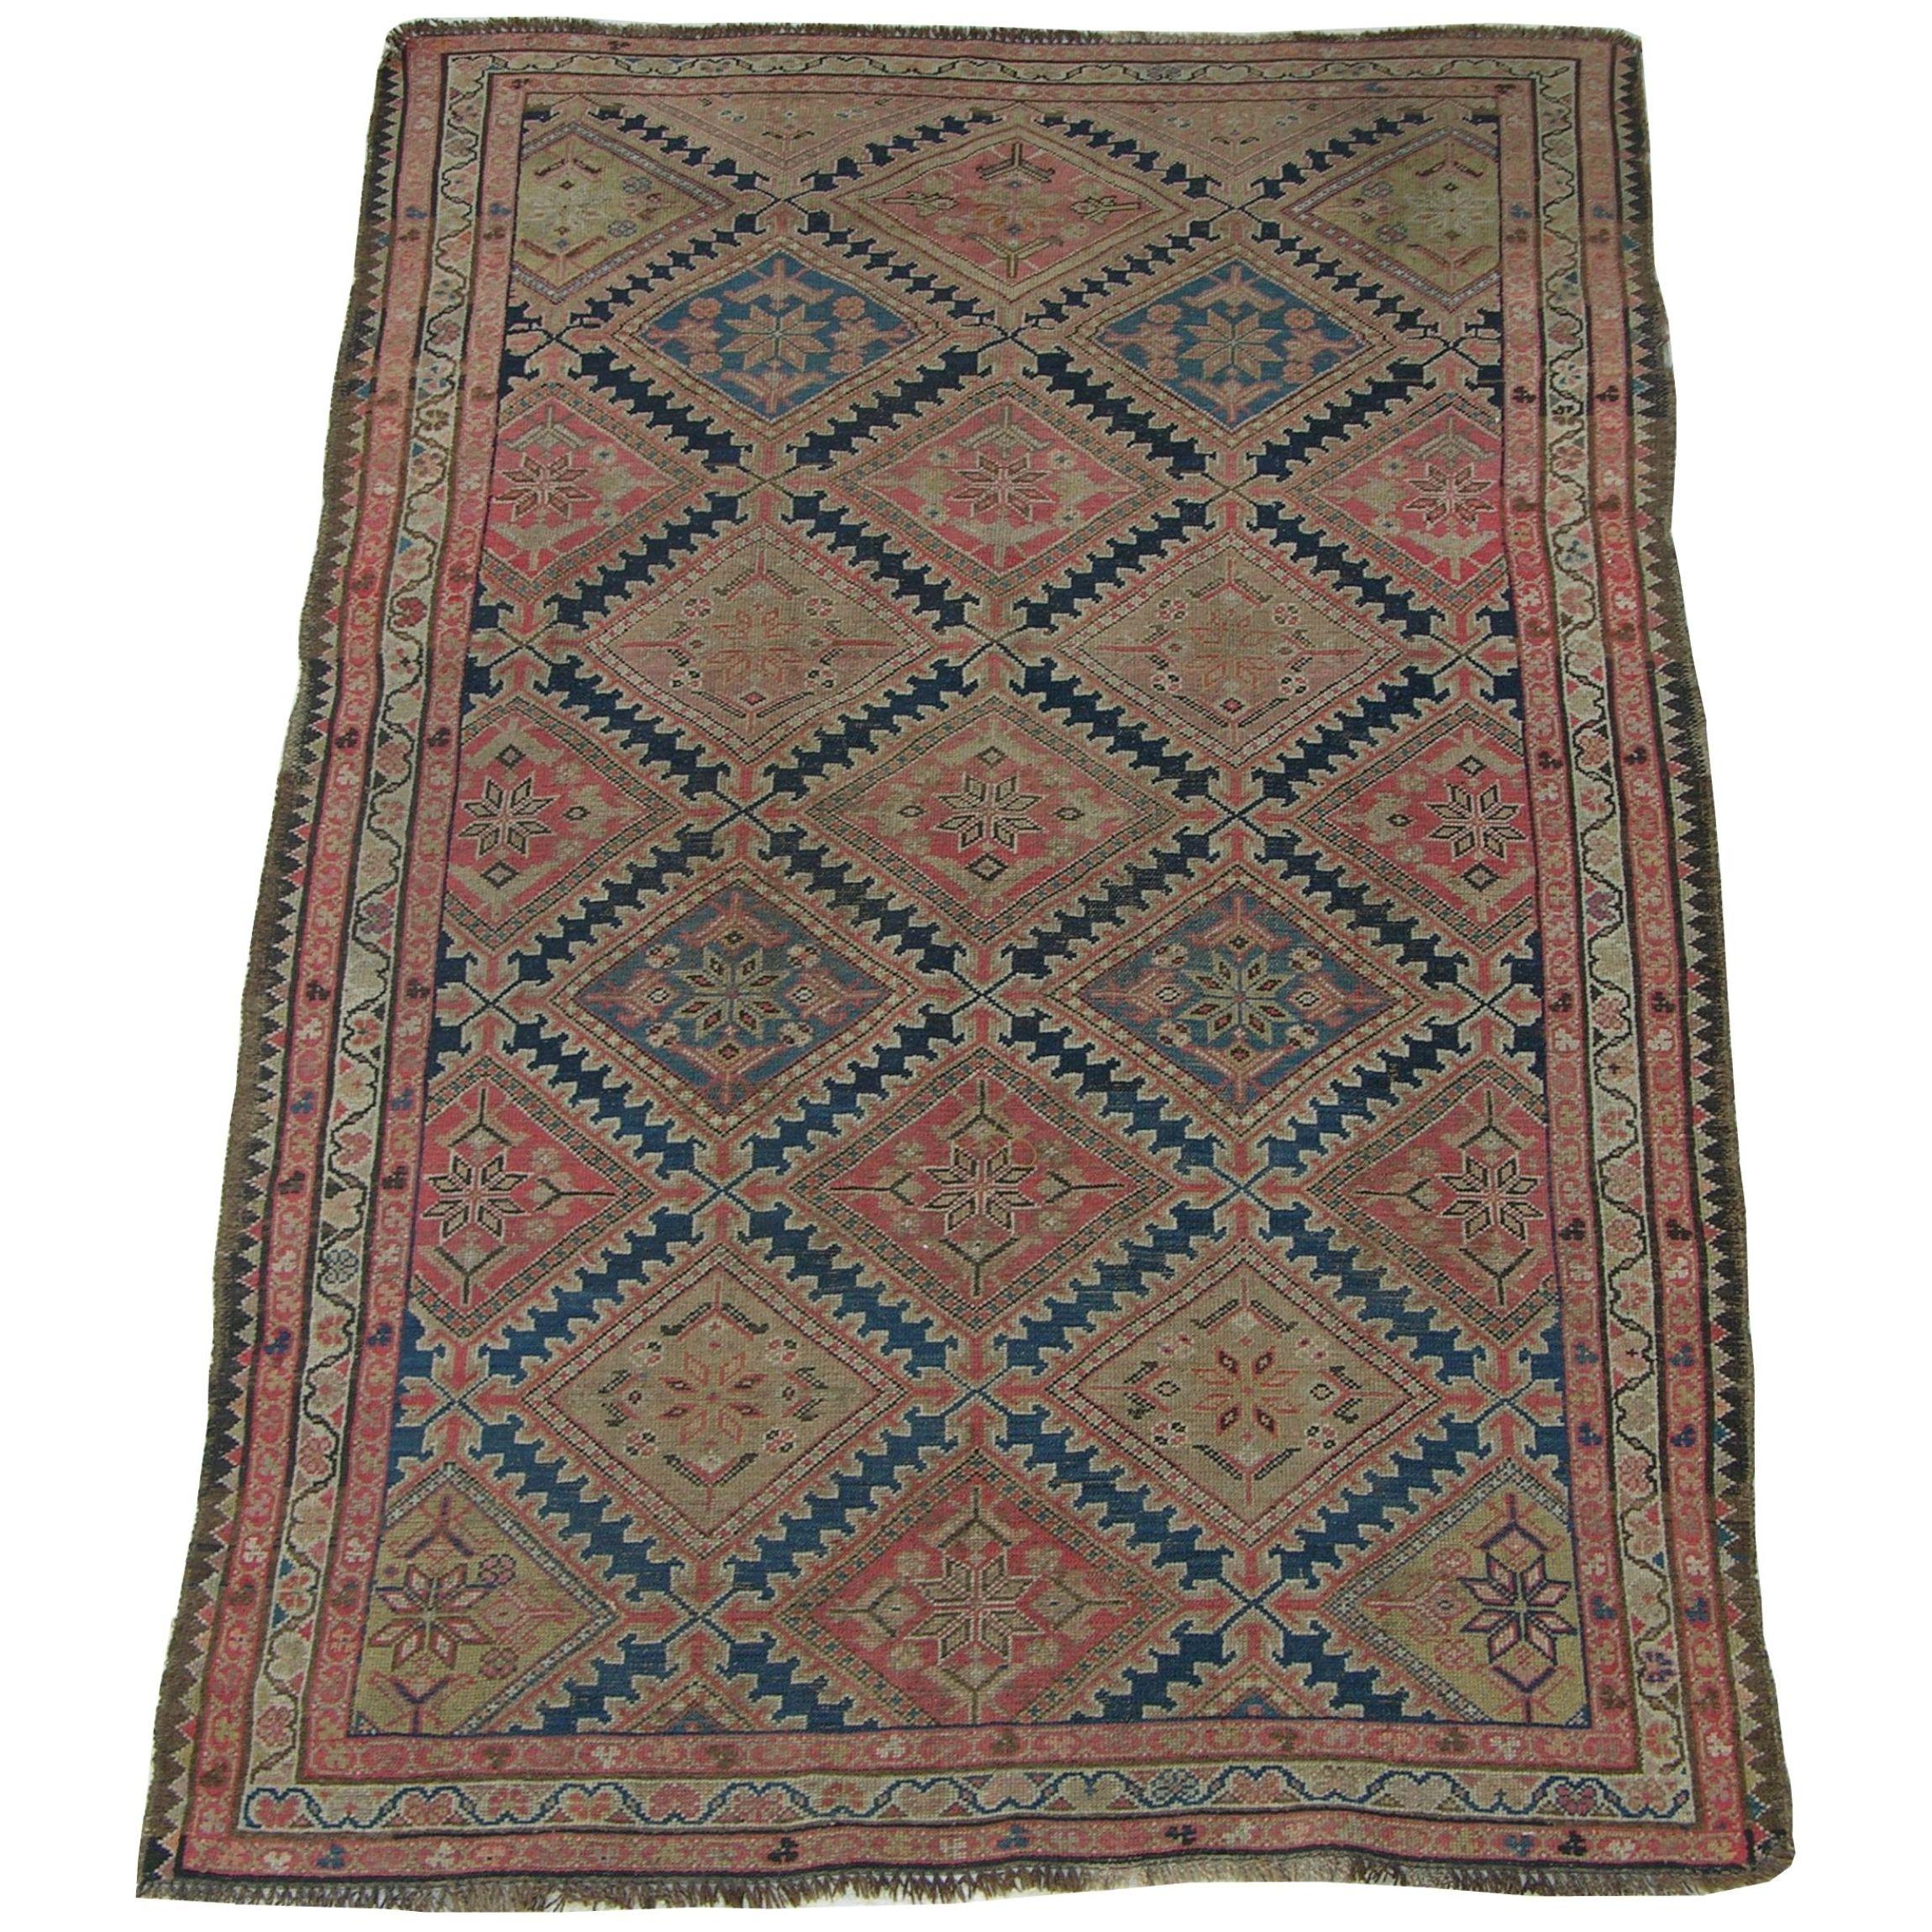 Antique Malayer Rug 6.6x4.2 In Good Condition For Sale In Los Angeles, US